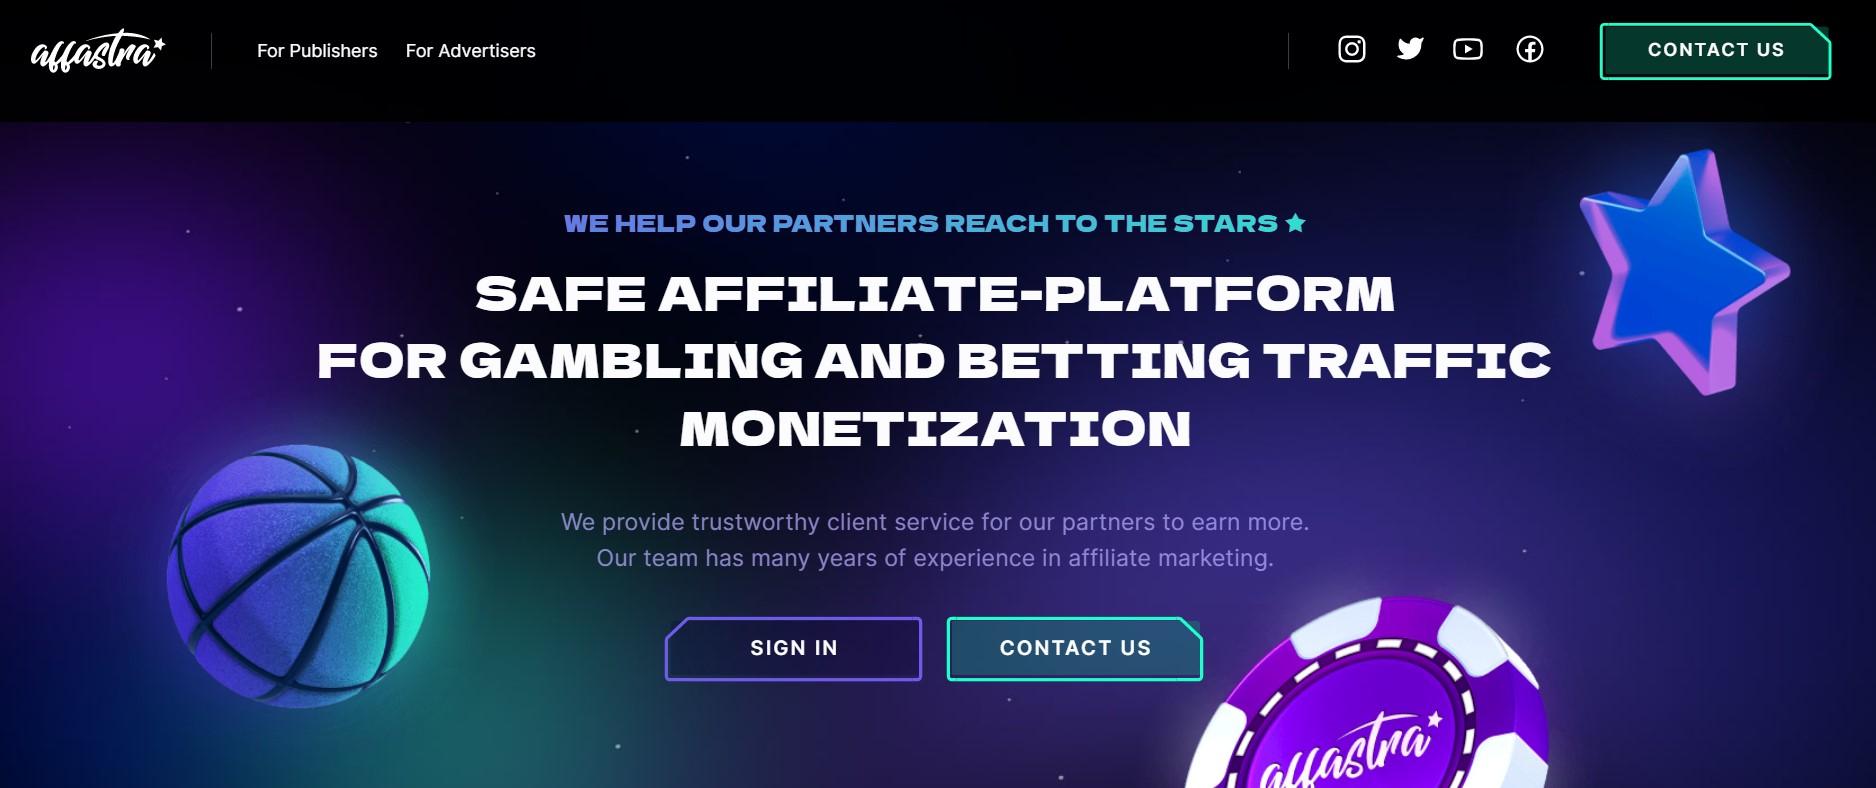 Affastra Affiliate Network Review and Testimonials